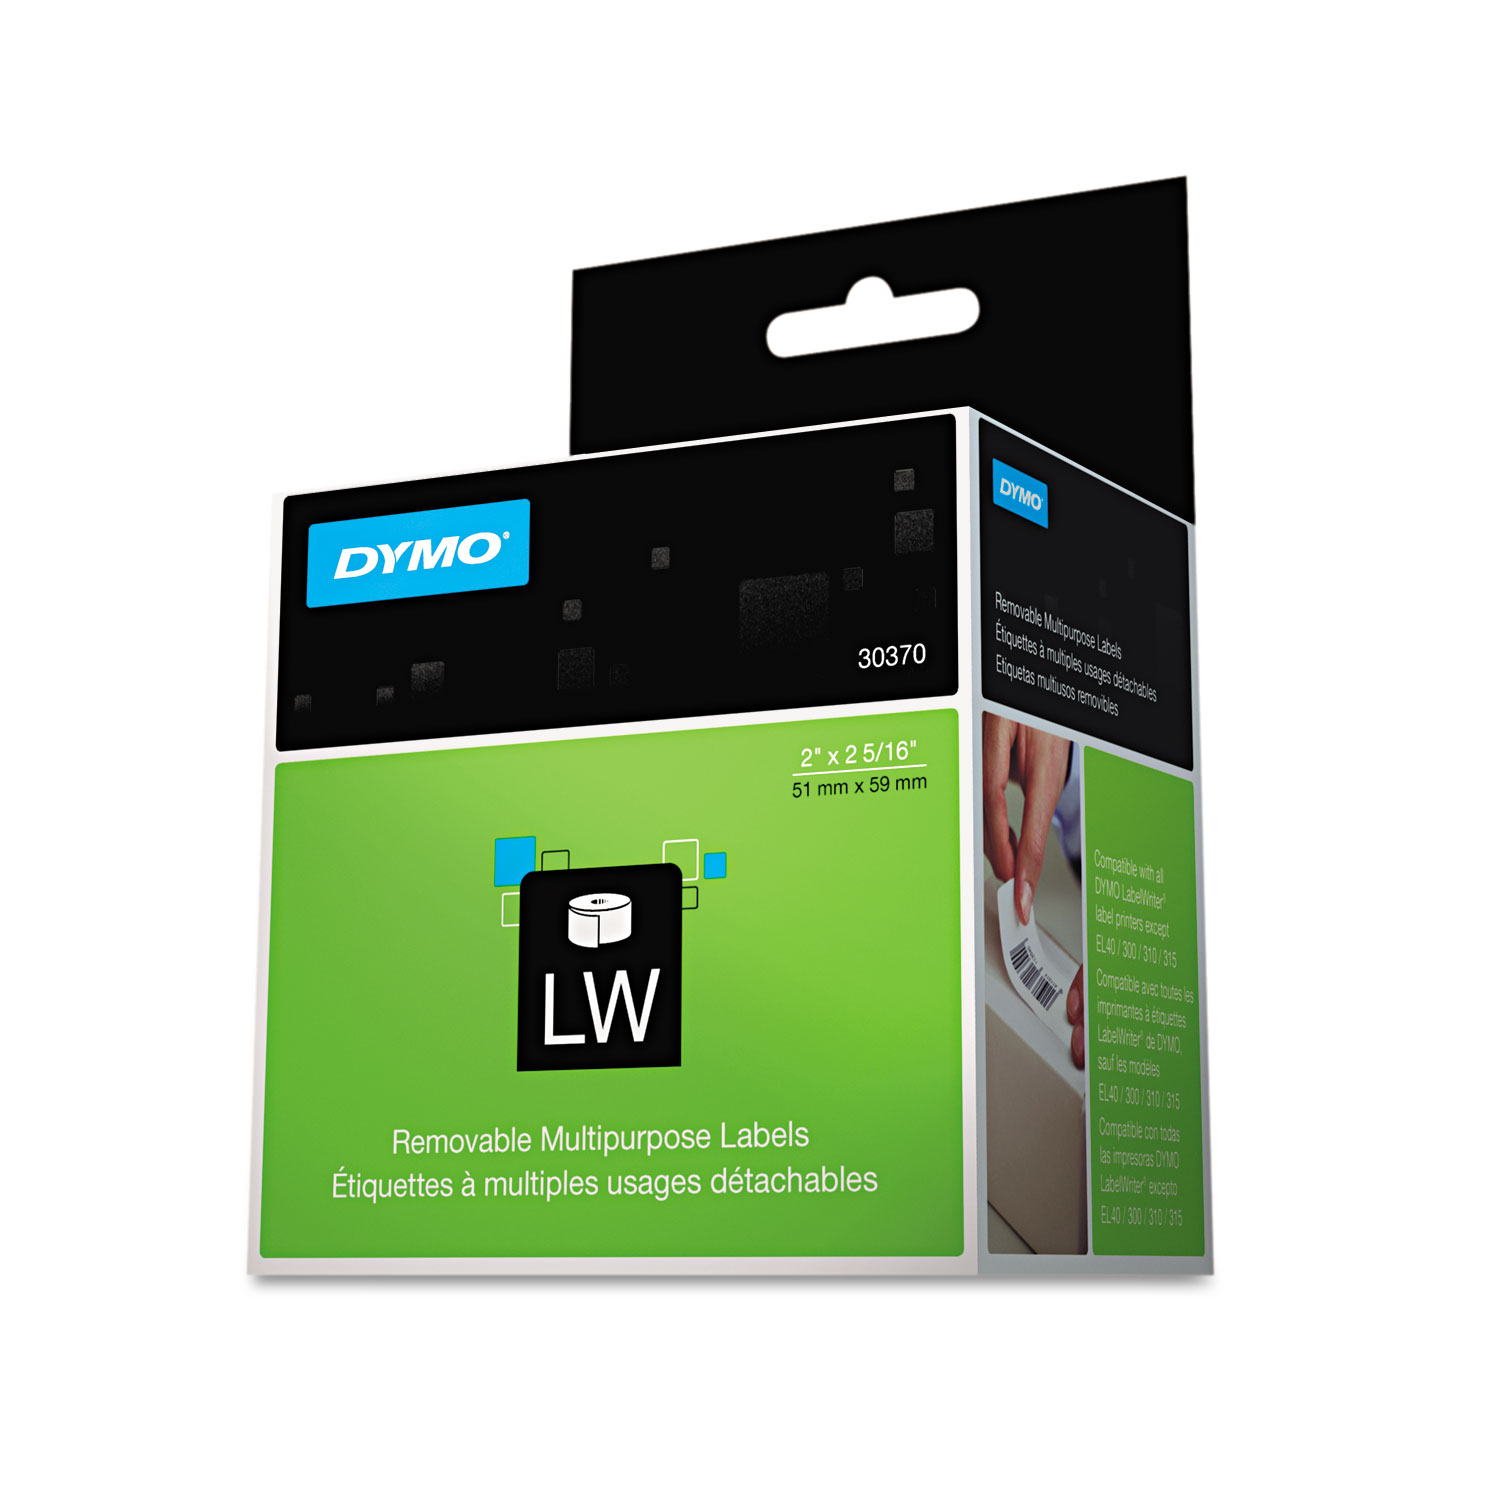  DYMO 30370 LabelWriter Multipurpose Labels, 2 x 2.31, White, 250 Labels/Roll (DYM30370) 